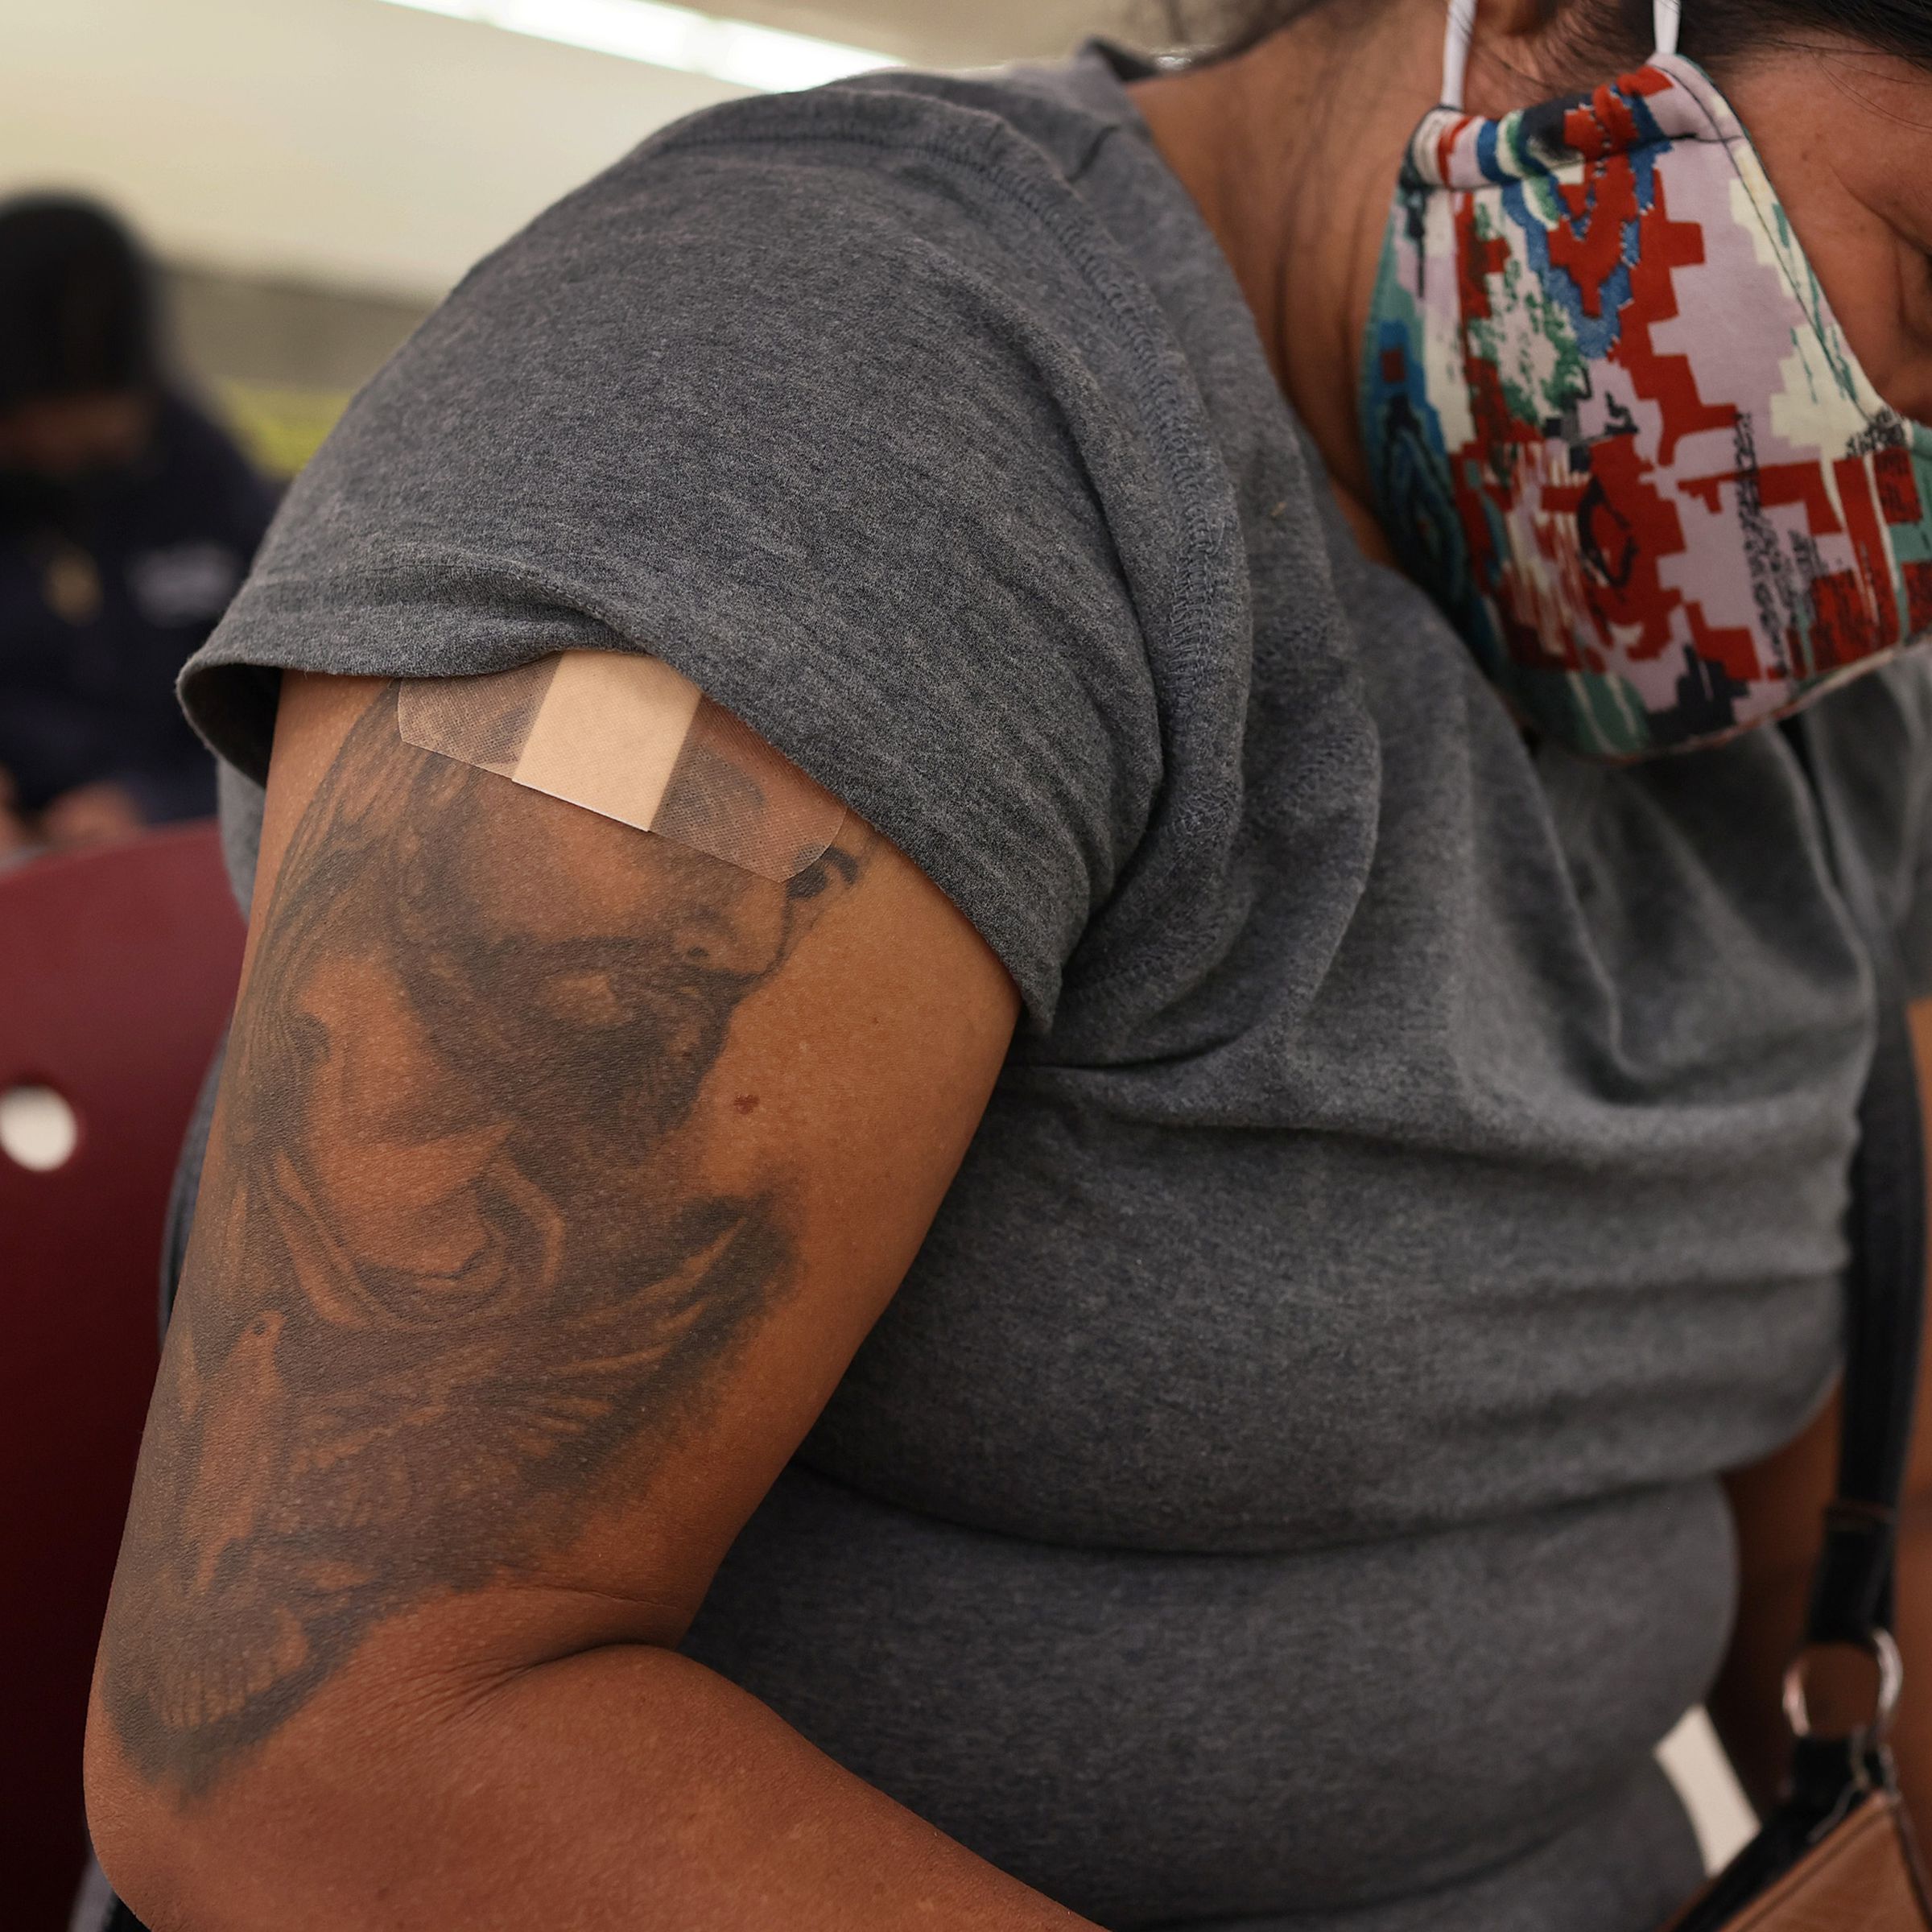 Florida Vaccination Effort Aims To Vaccinate Migrant Workers